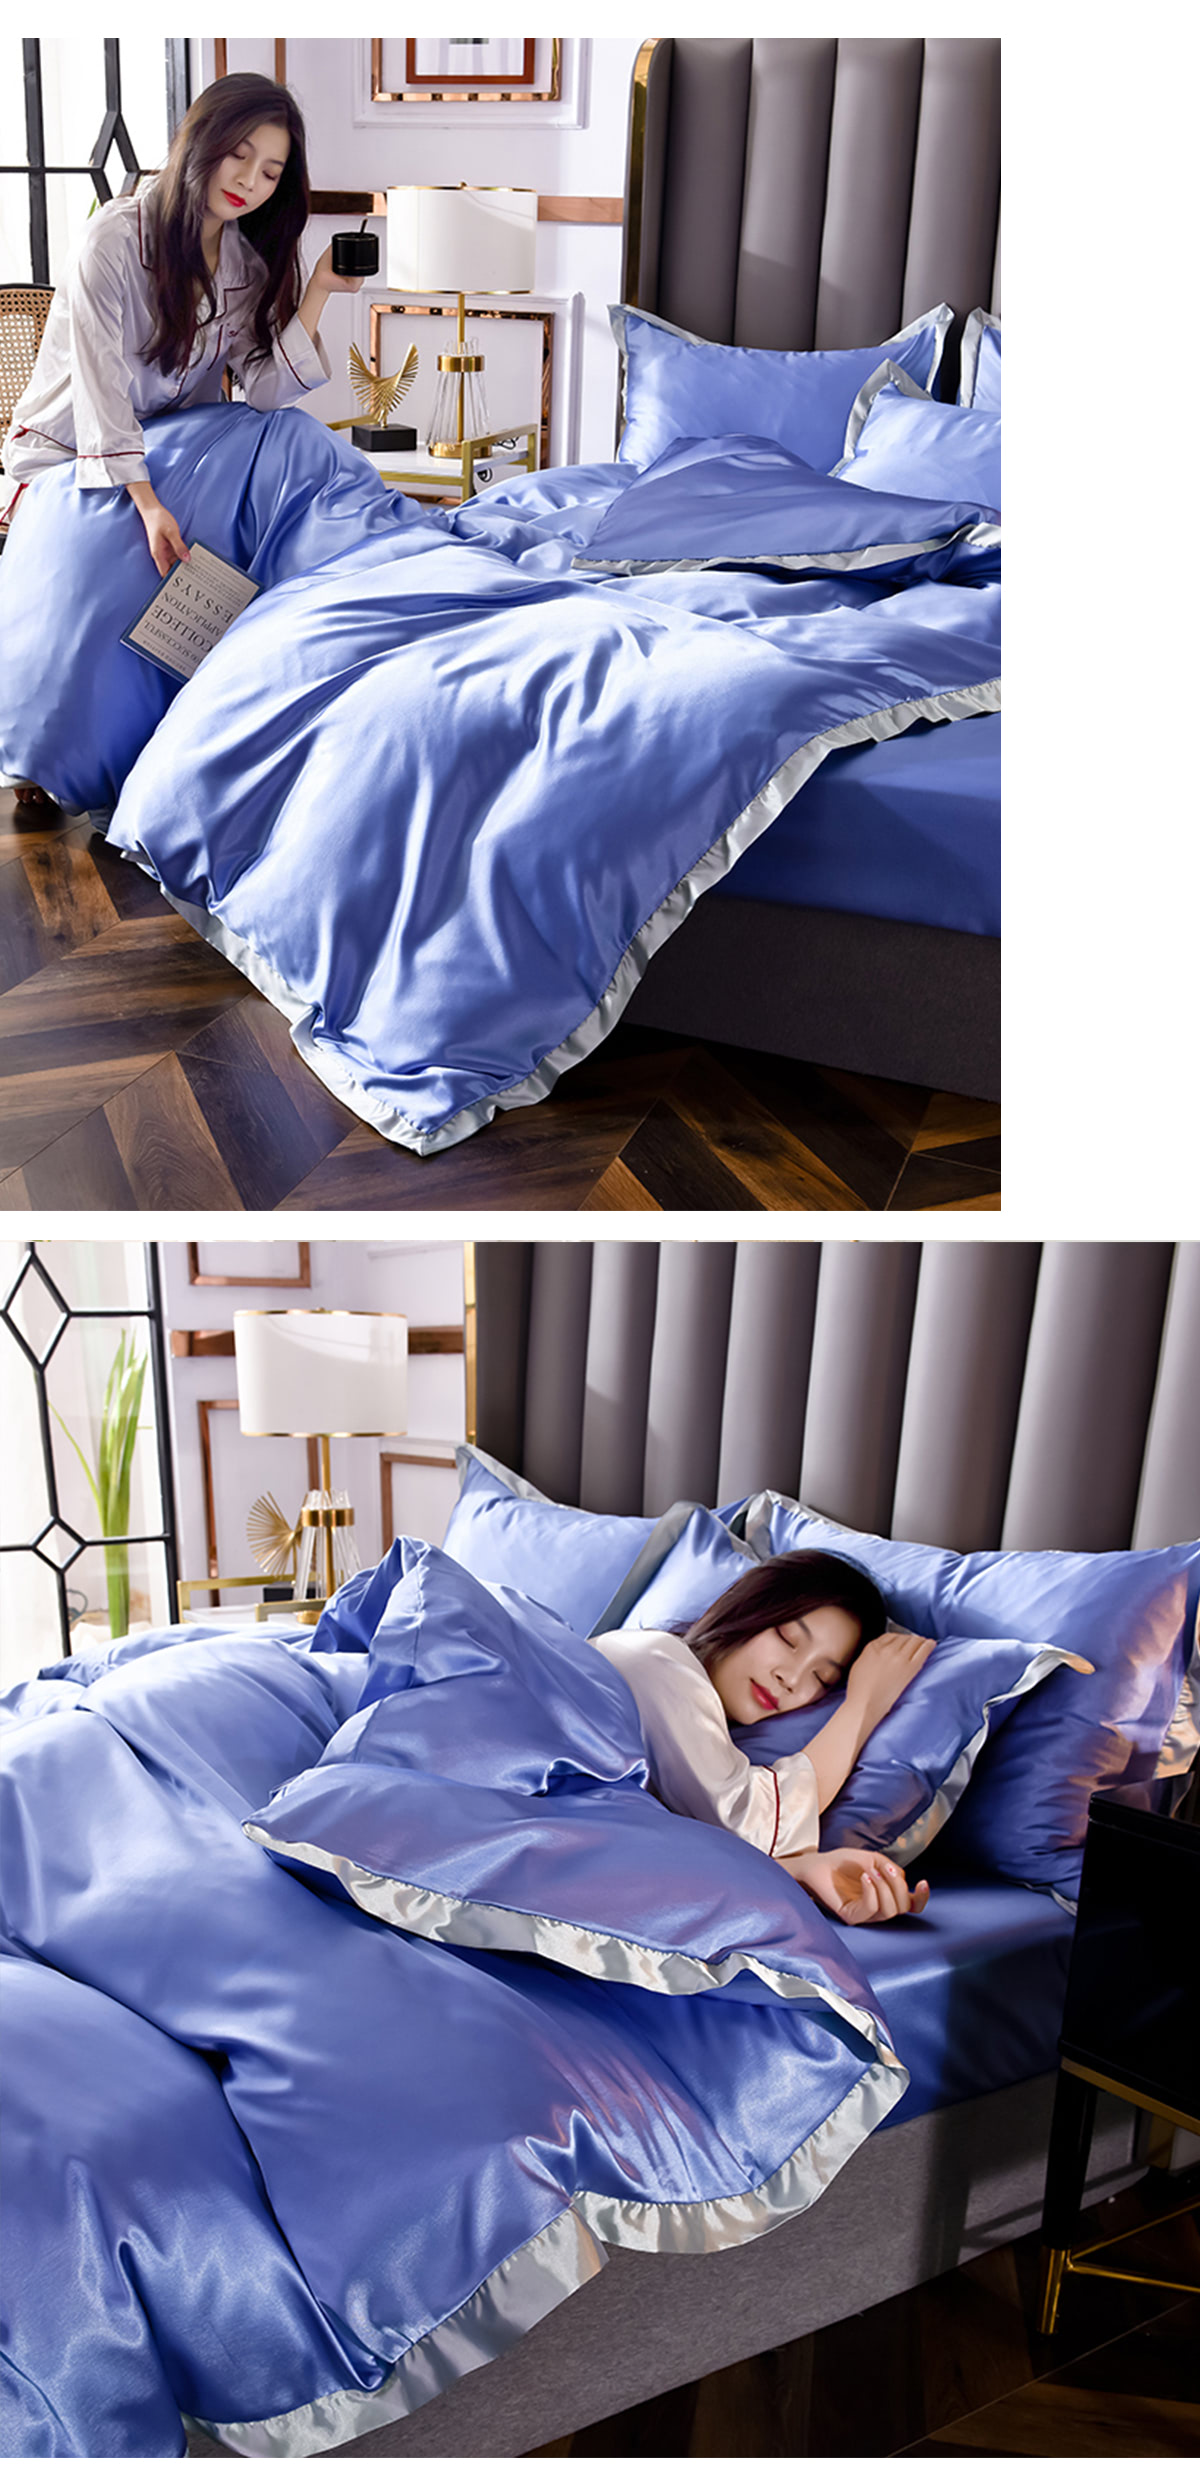 Fresh-and-Soft-Comfortable-Satin-Bed-Cover-Sheet-Set17.jpg